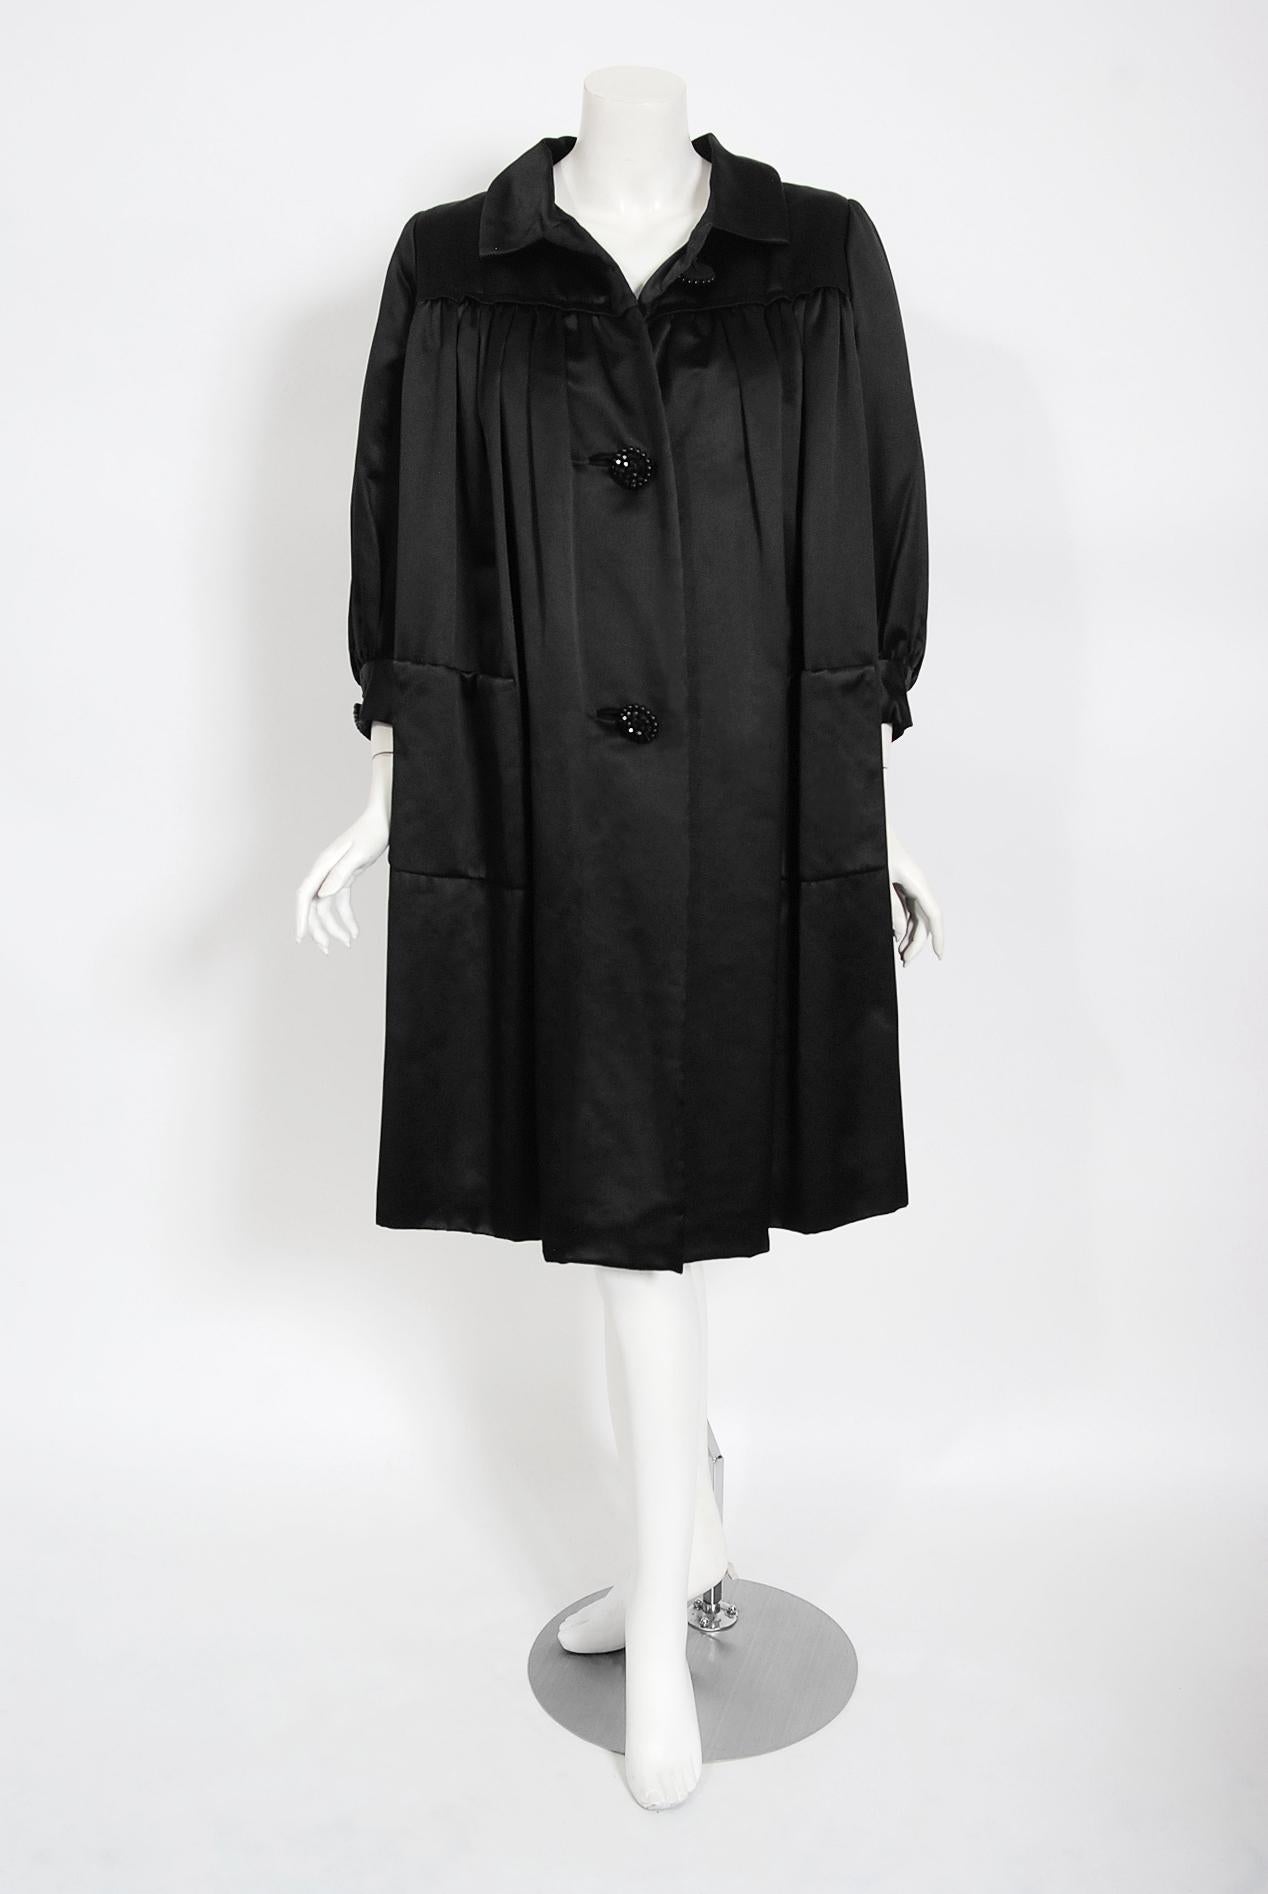 This exquisite Traina-Norell designer coat, fashioned in a high-quality duchess silk satin, exemplifies their signature blend of couture-level quality with quintessentially American style—elegant in its simplicity. This was a difficult piece to